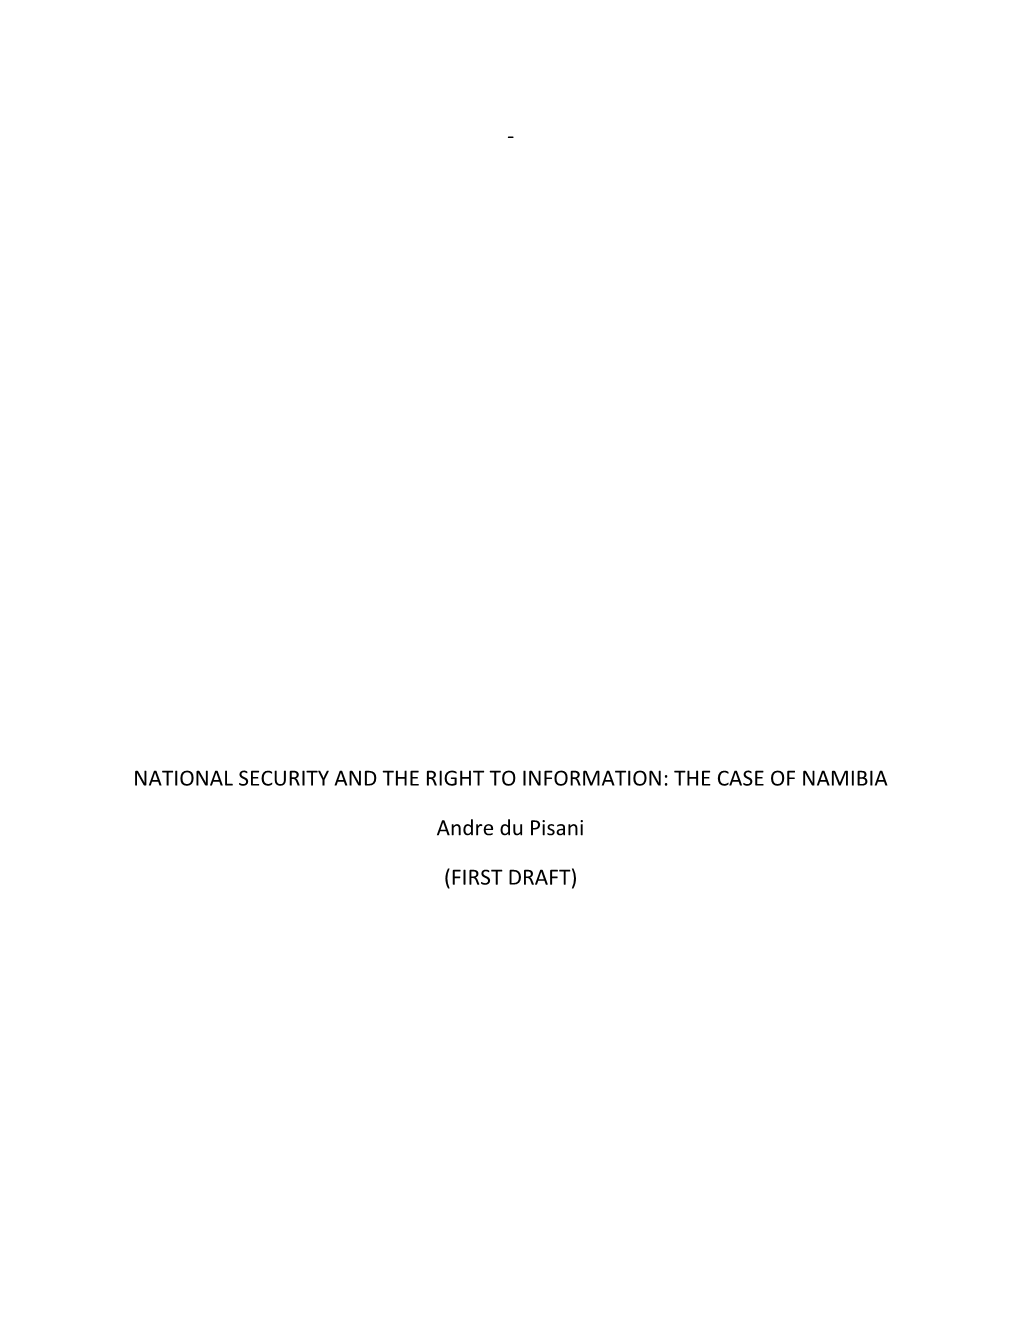 National Security and the Right to Information: the Case of Namibia